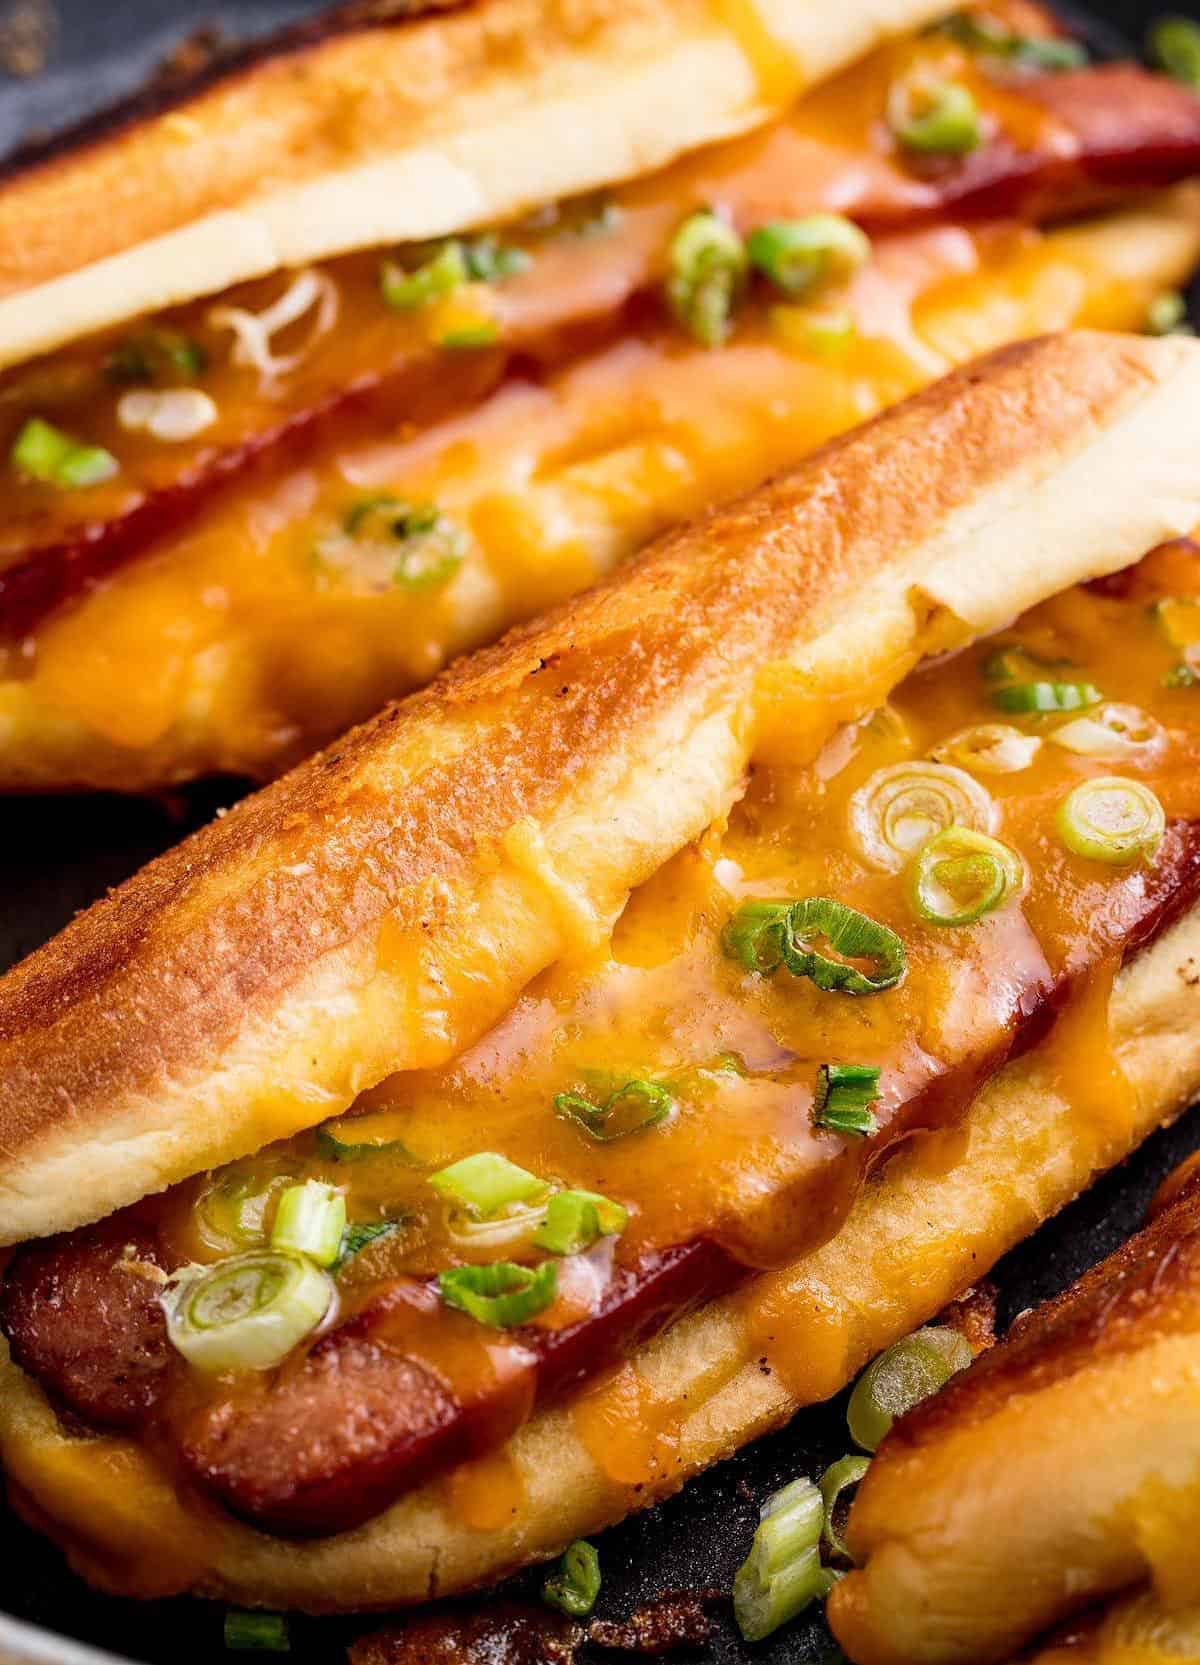  Who needs a bun when you can have a grilled cheese sandwich as a hot dog bun?